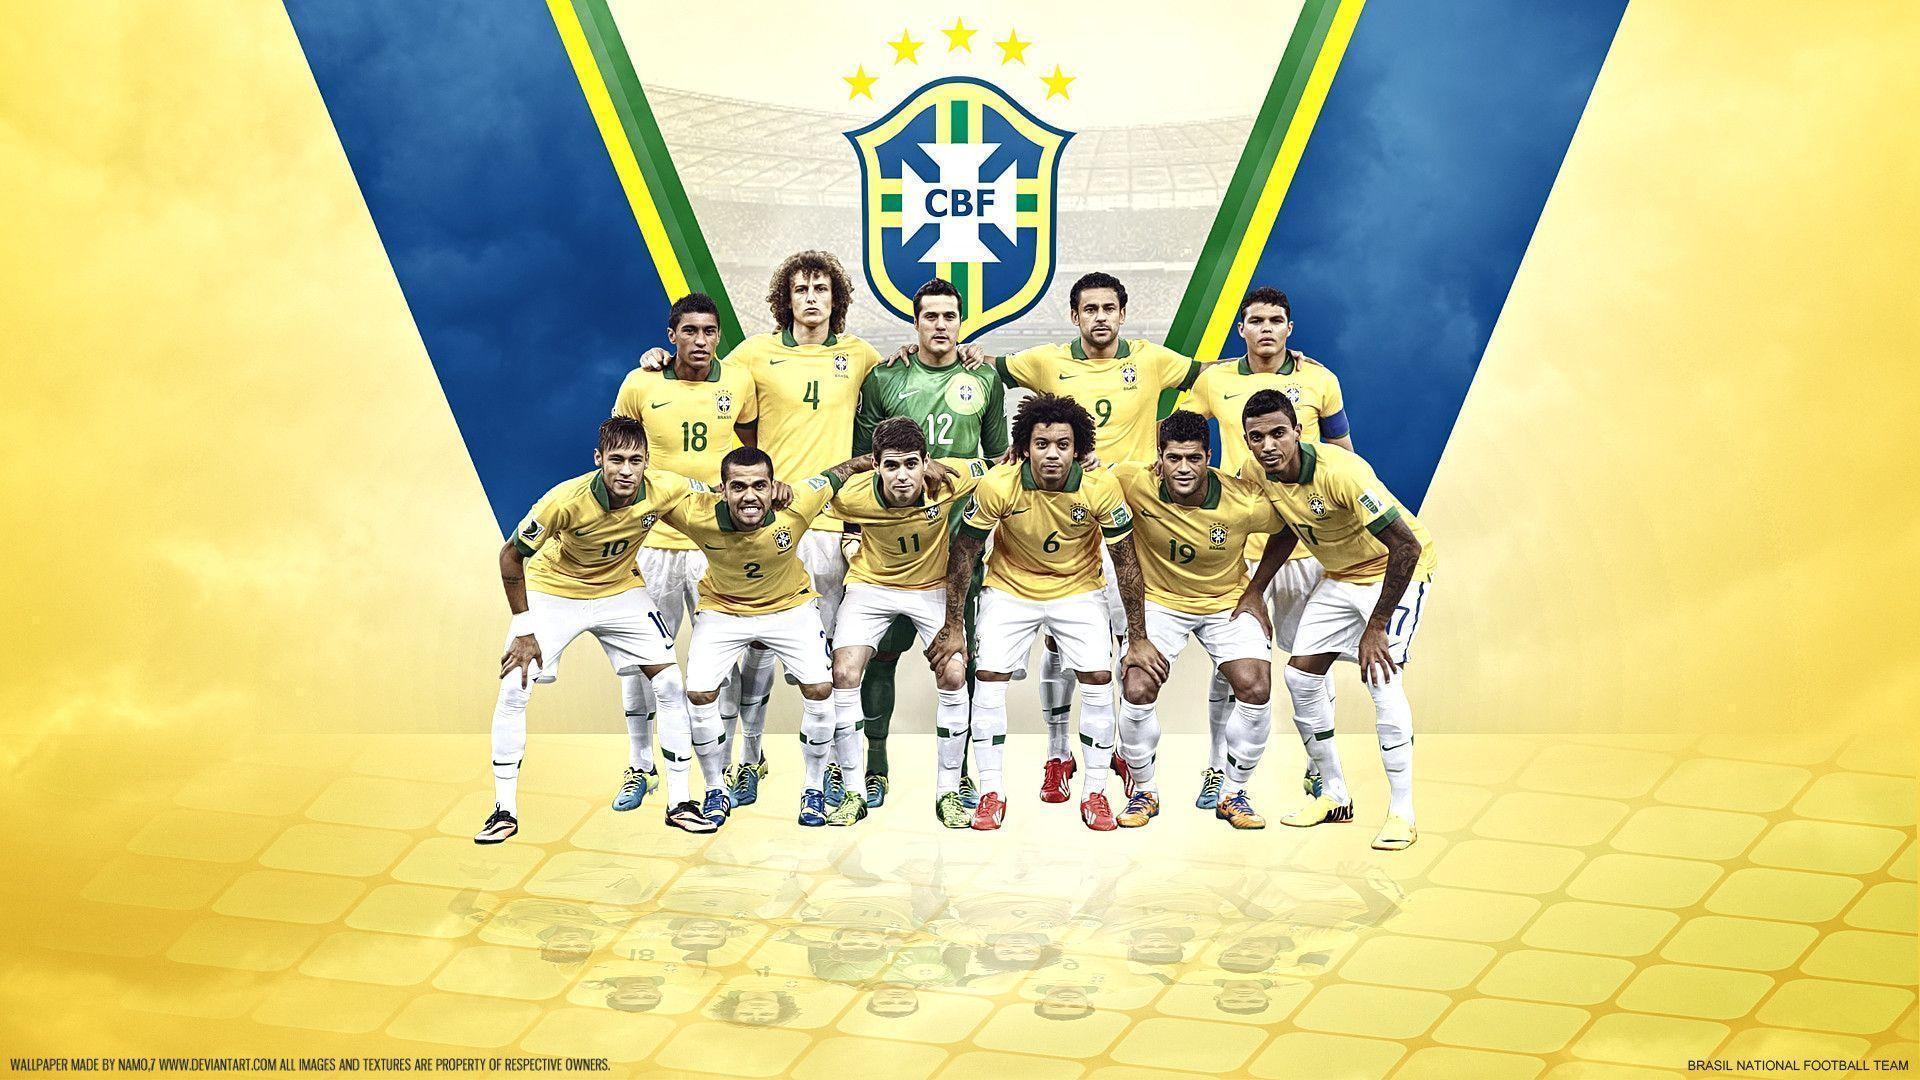 Cool Brazil national team - for wallpaper in HD